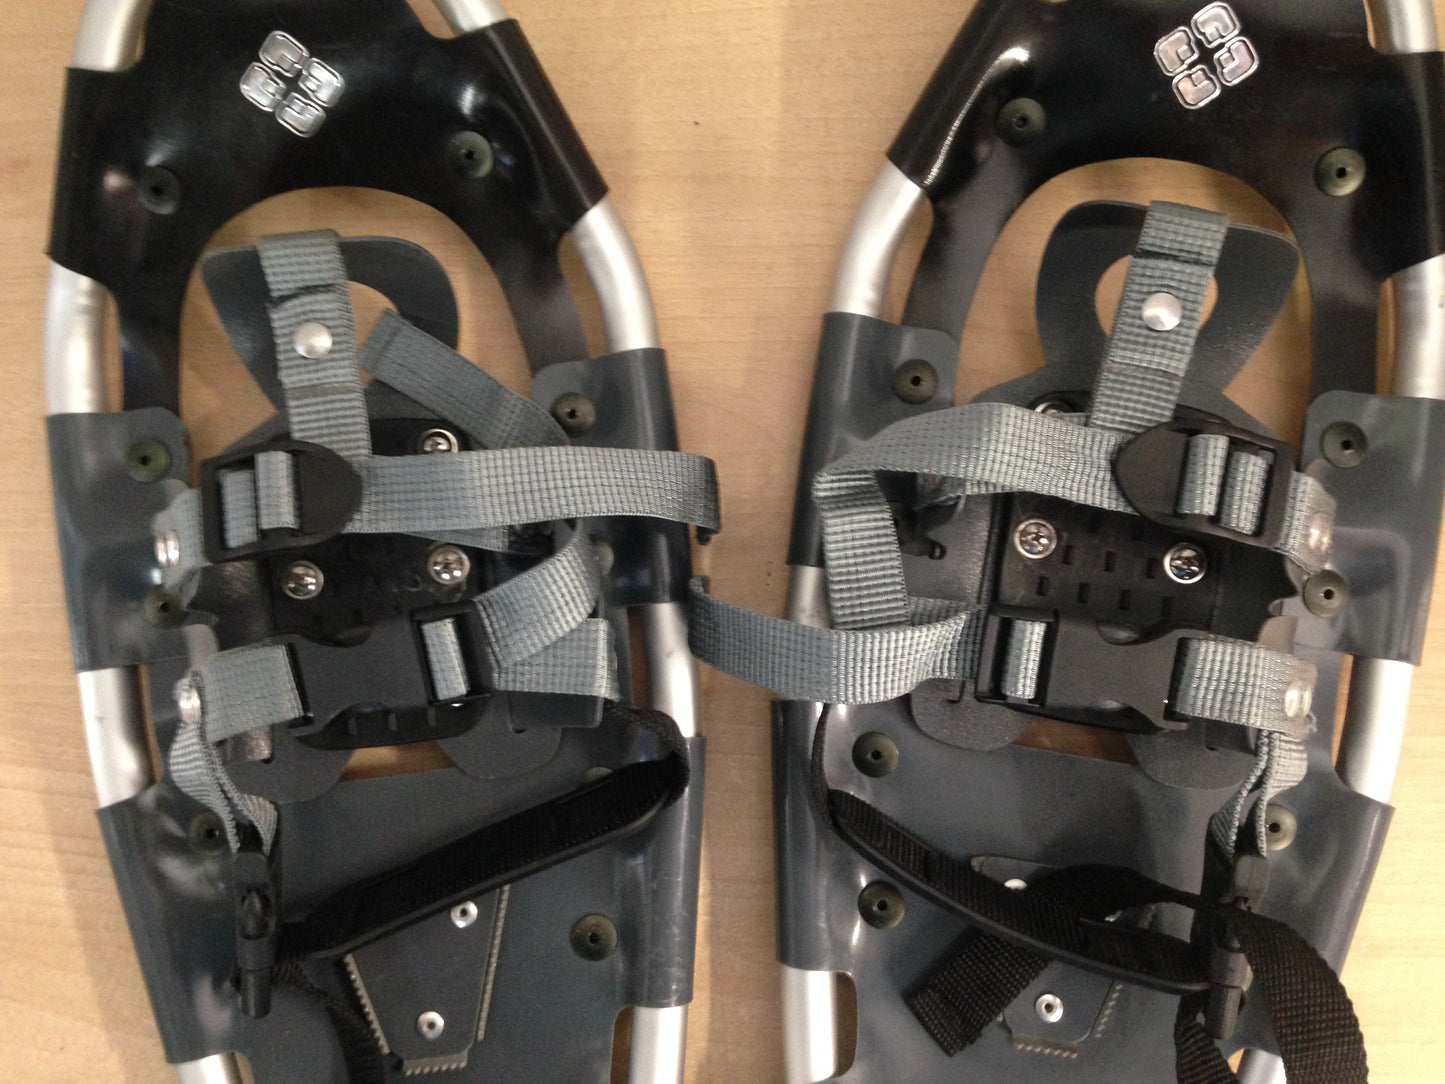 Snowshoes Adult Size 22 75-190 Lb Fiveforty Black Grey As New